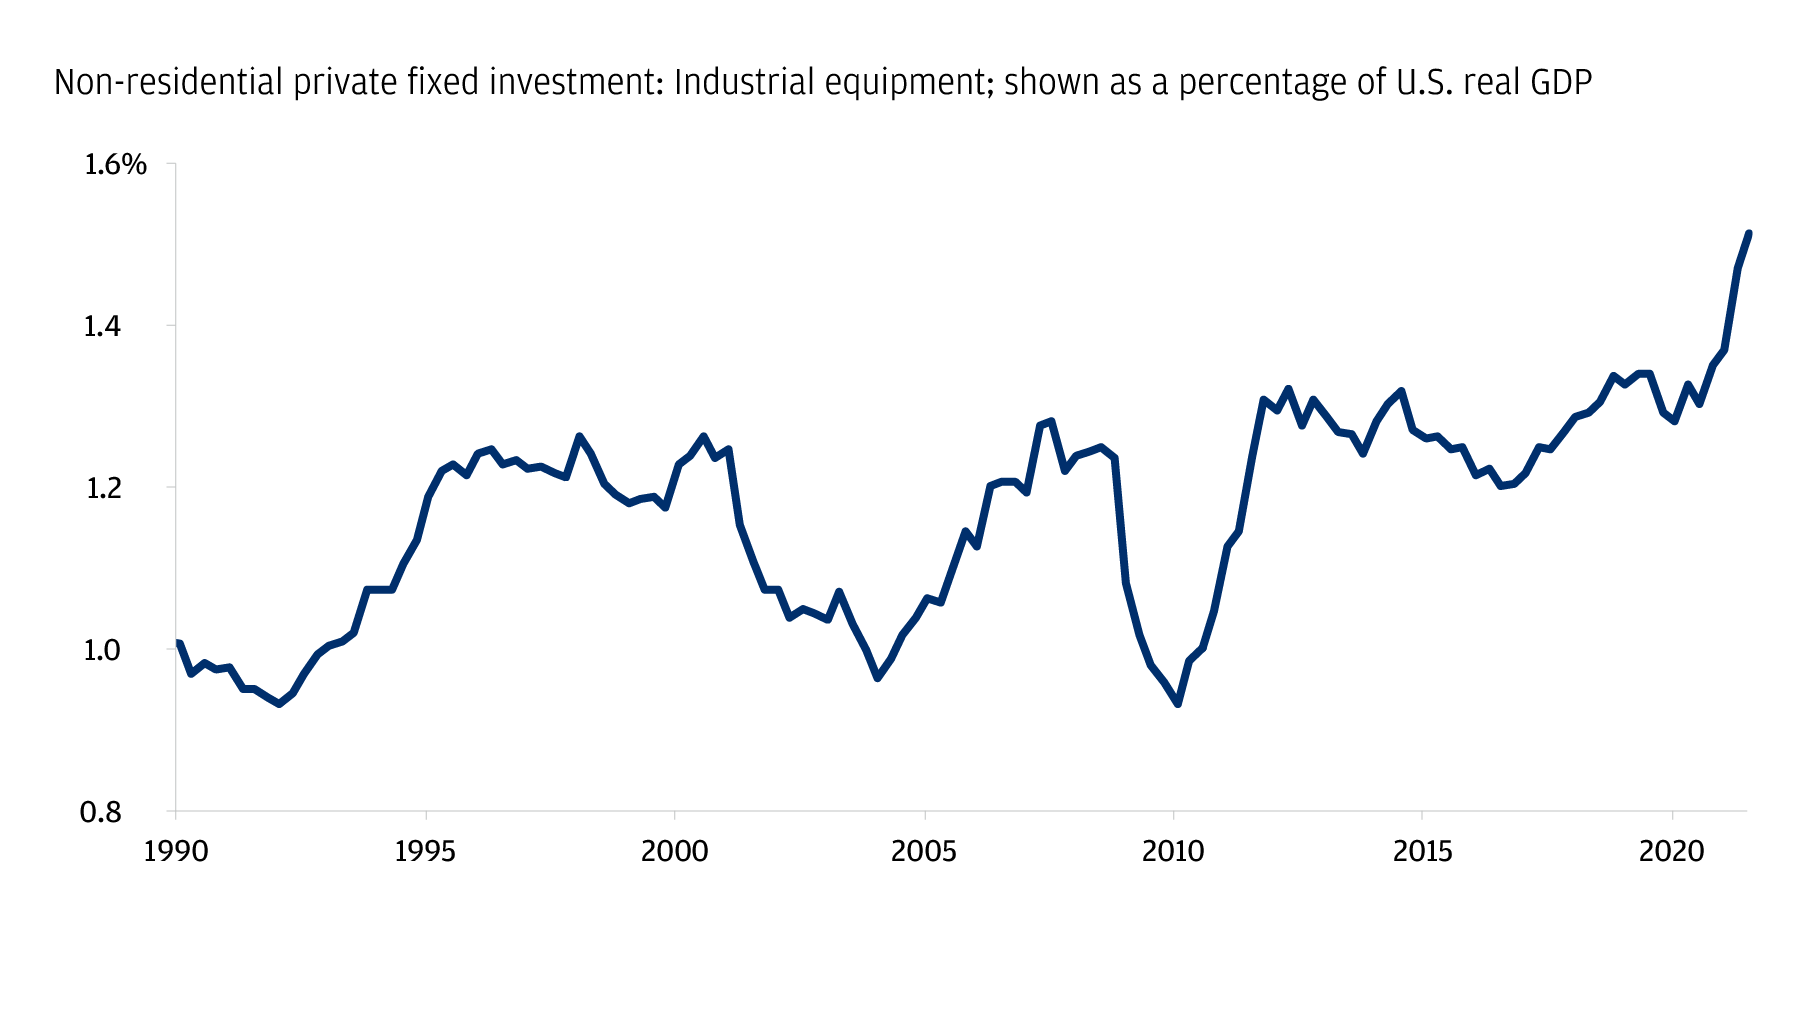 This chart shows U.S. investment in non-residential private fixed investment in industrial equipment. The dataset is shown as a percentage of U.S. real GDP from 1990 through July 2021. In early 1990, U.S. non-residential private fixed investment in industrial equipment as a percentage of real GDP was around 1.0%. The figure remained close to 1.0% until the mid-1990s, when it climbed to 1.2% before falling back to 1.0% by 2004. The number remained range-bound between 1.0% and 1.3% until 2020, when the figure climbed to a peak of 1.51% in the most recent data from July 2021.